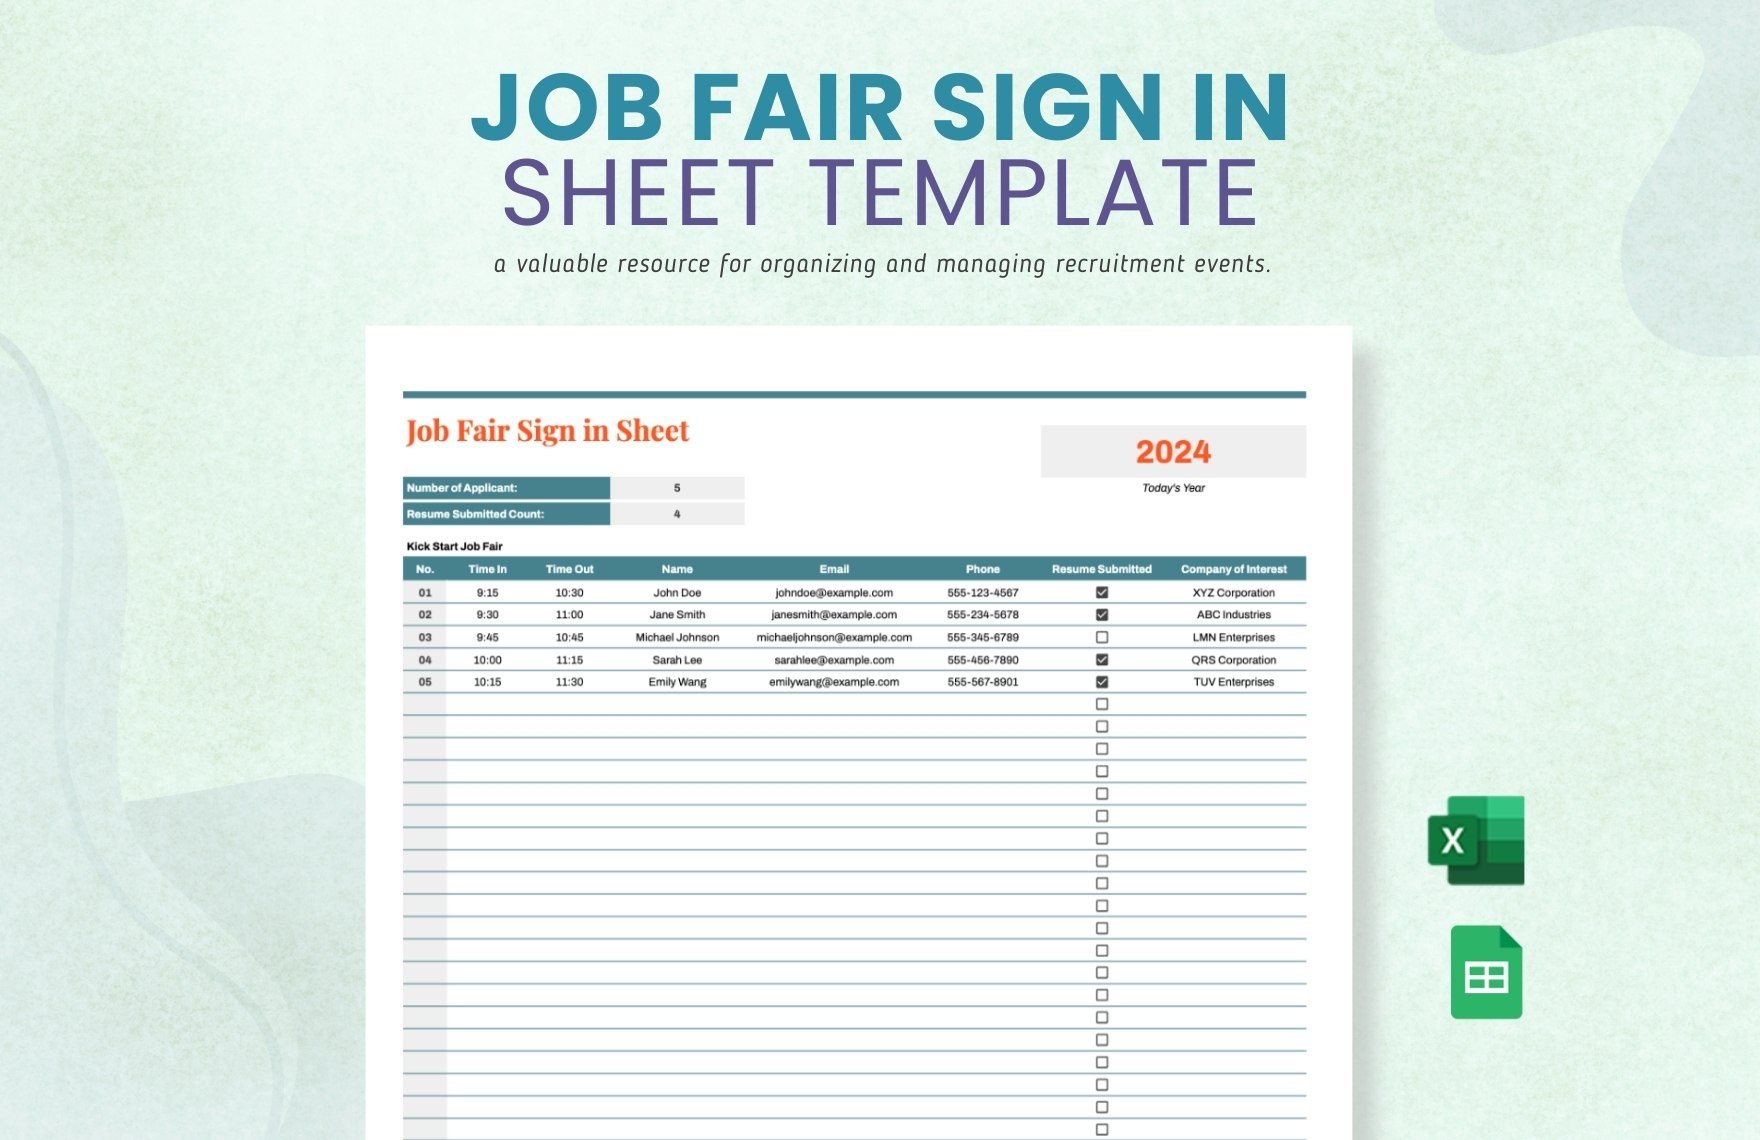 Job Fair Sign in Sheet Template in Excel, Google Sheets